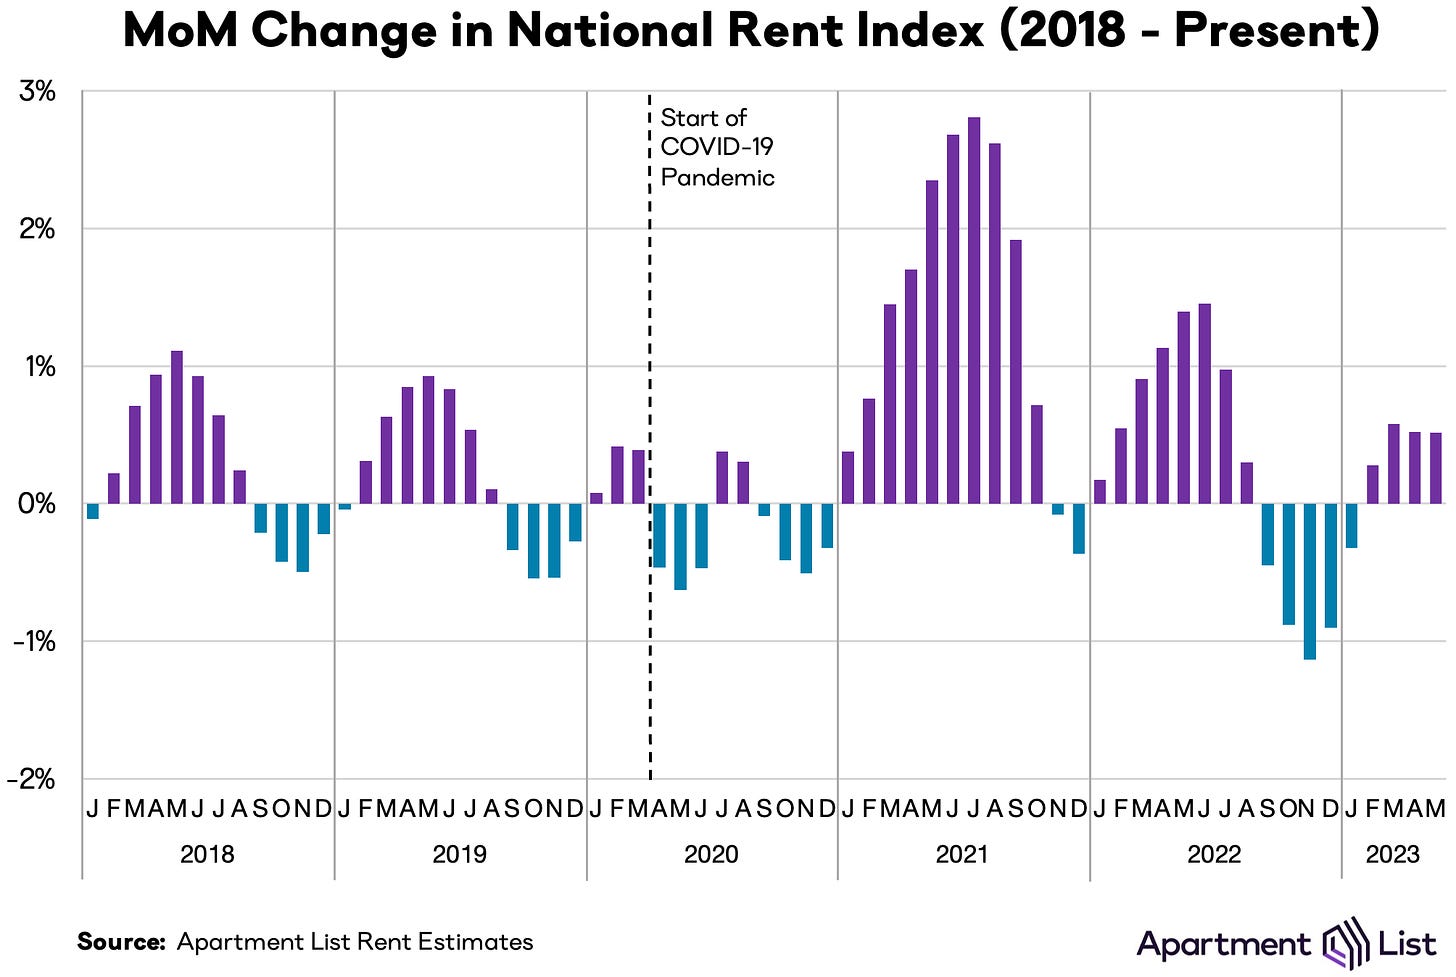 MoM rent growth may23